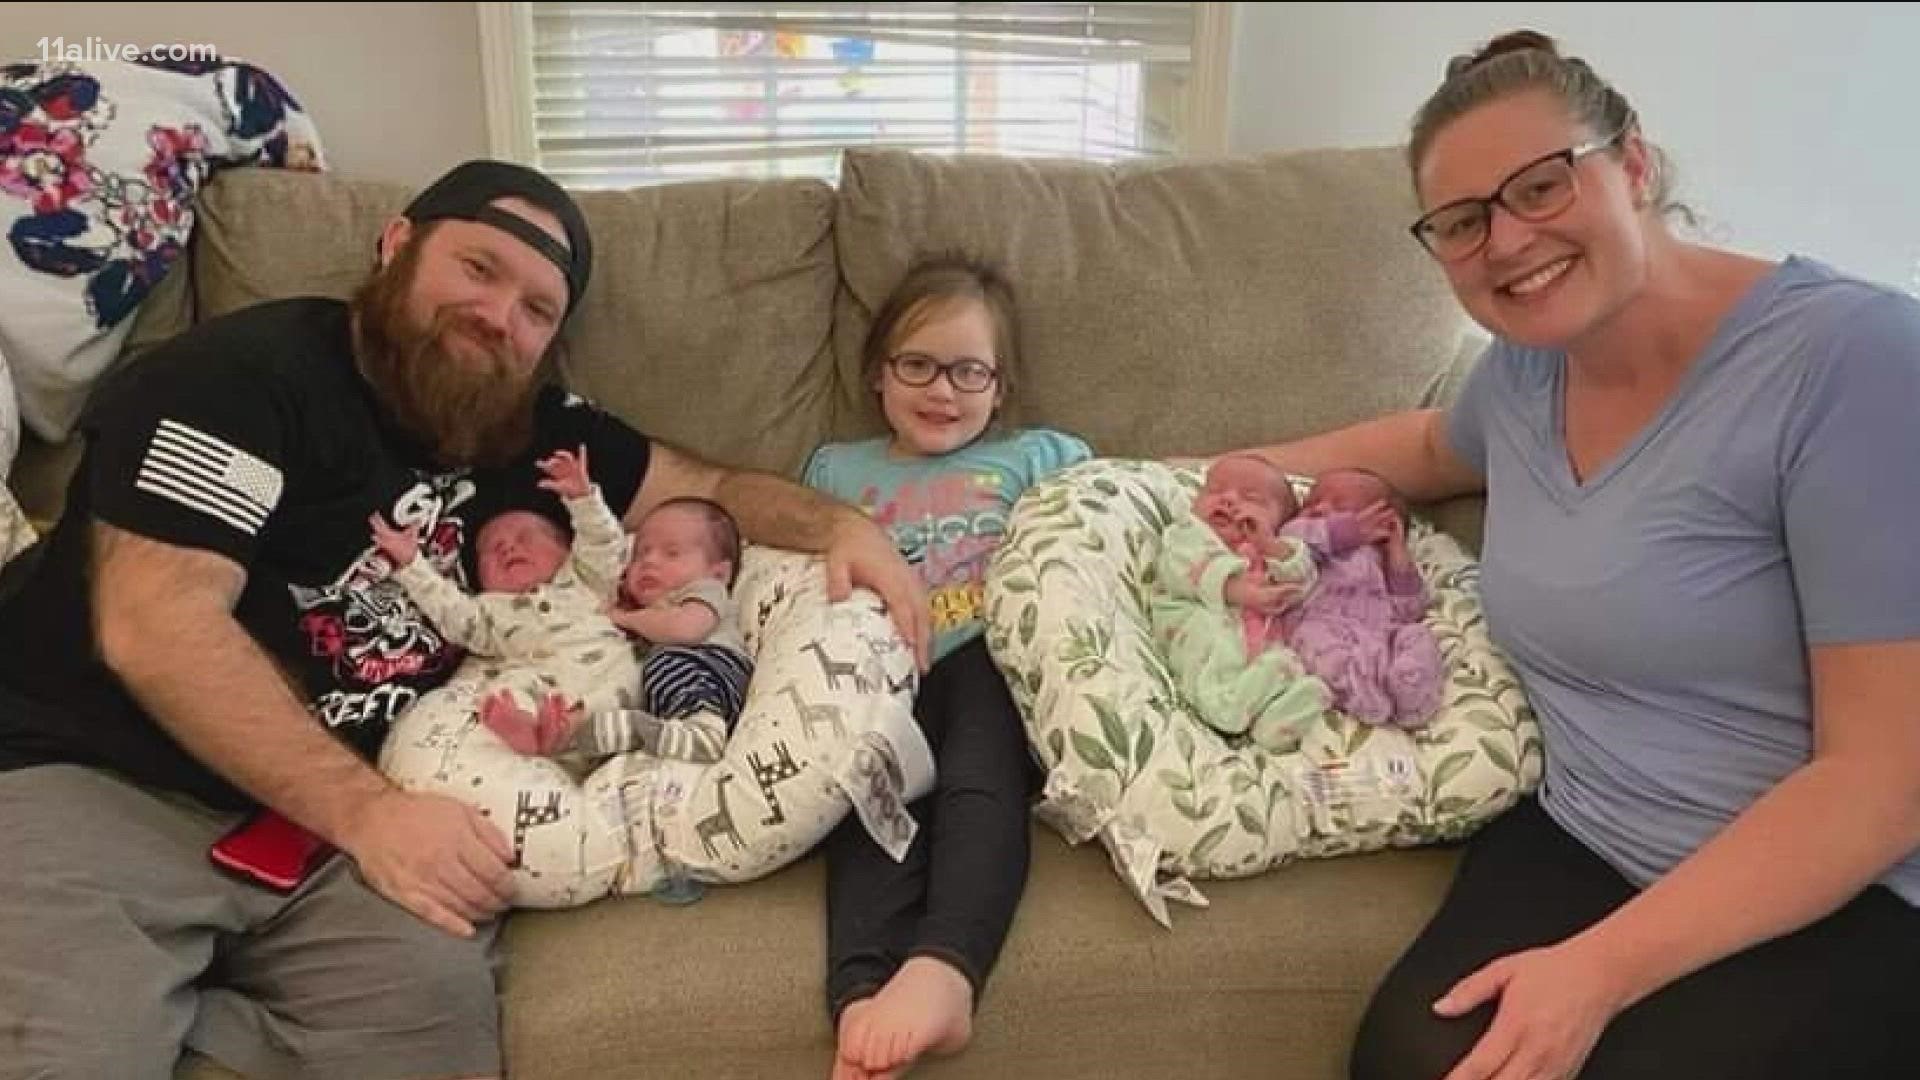 There was a huge welcome home party in Marietta on Friday as a local family brings home natural quadruplets.